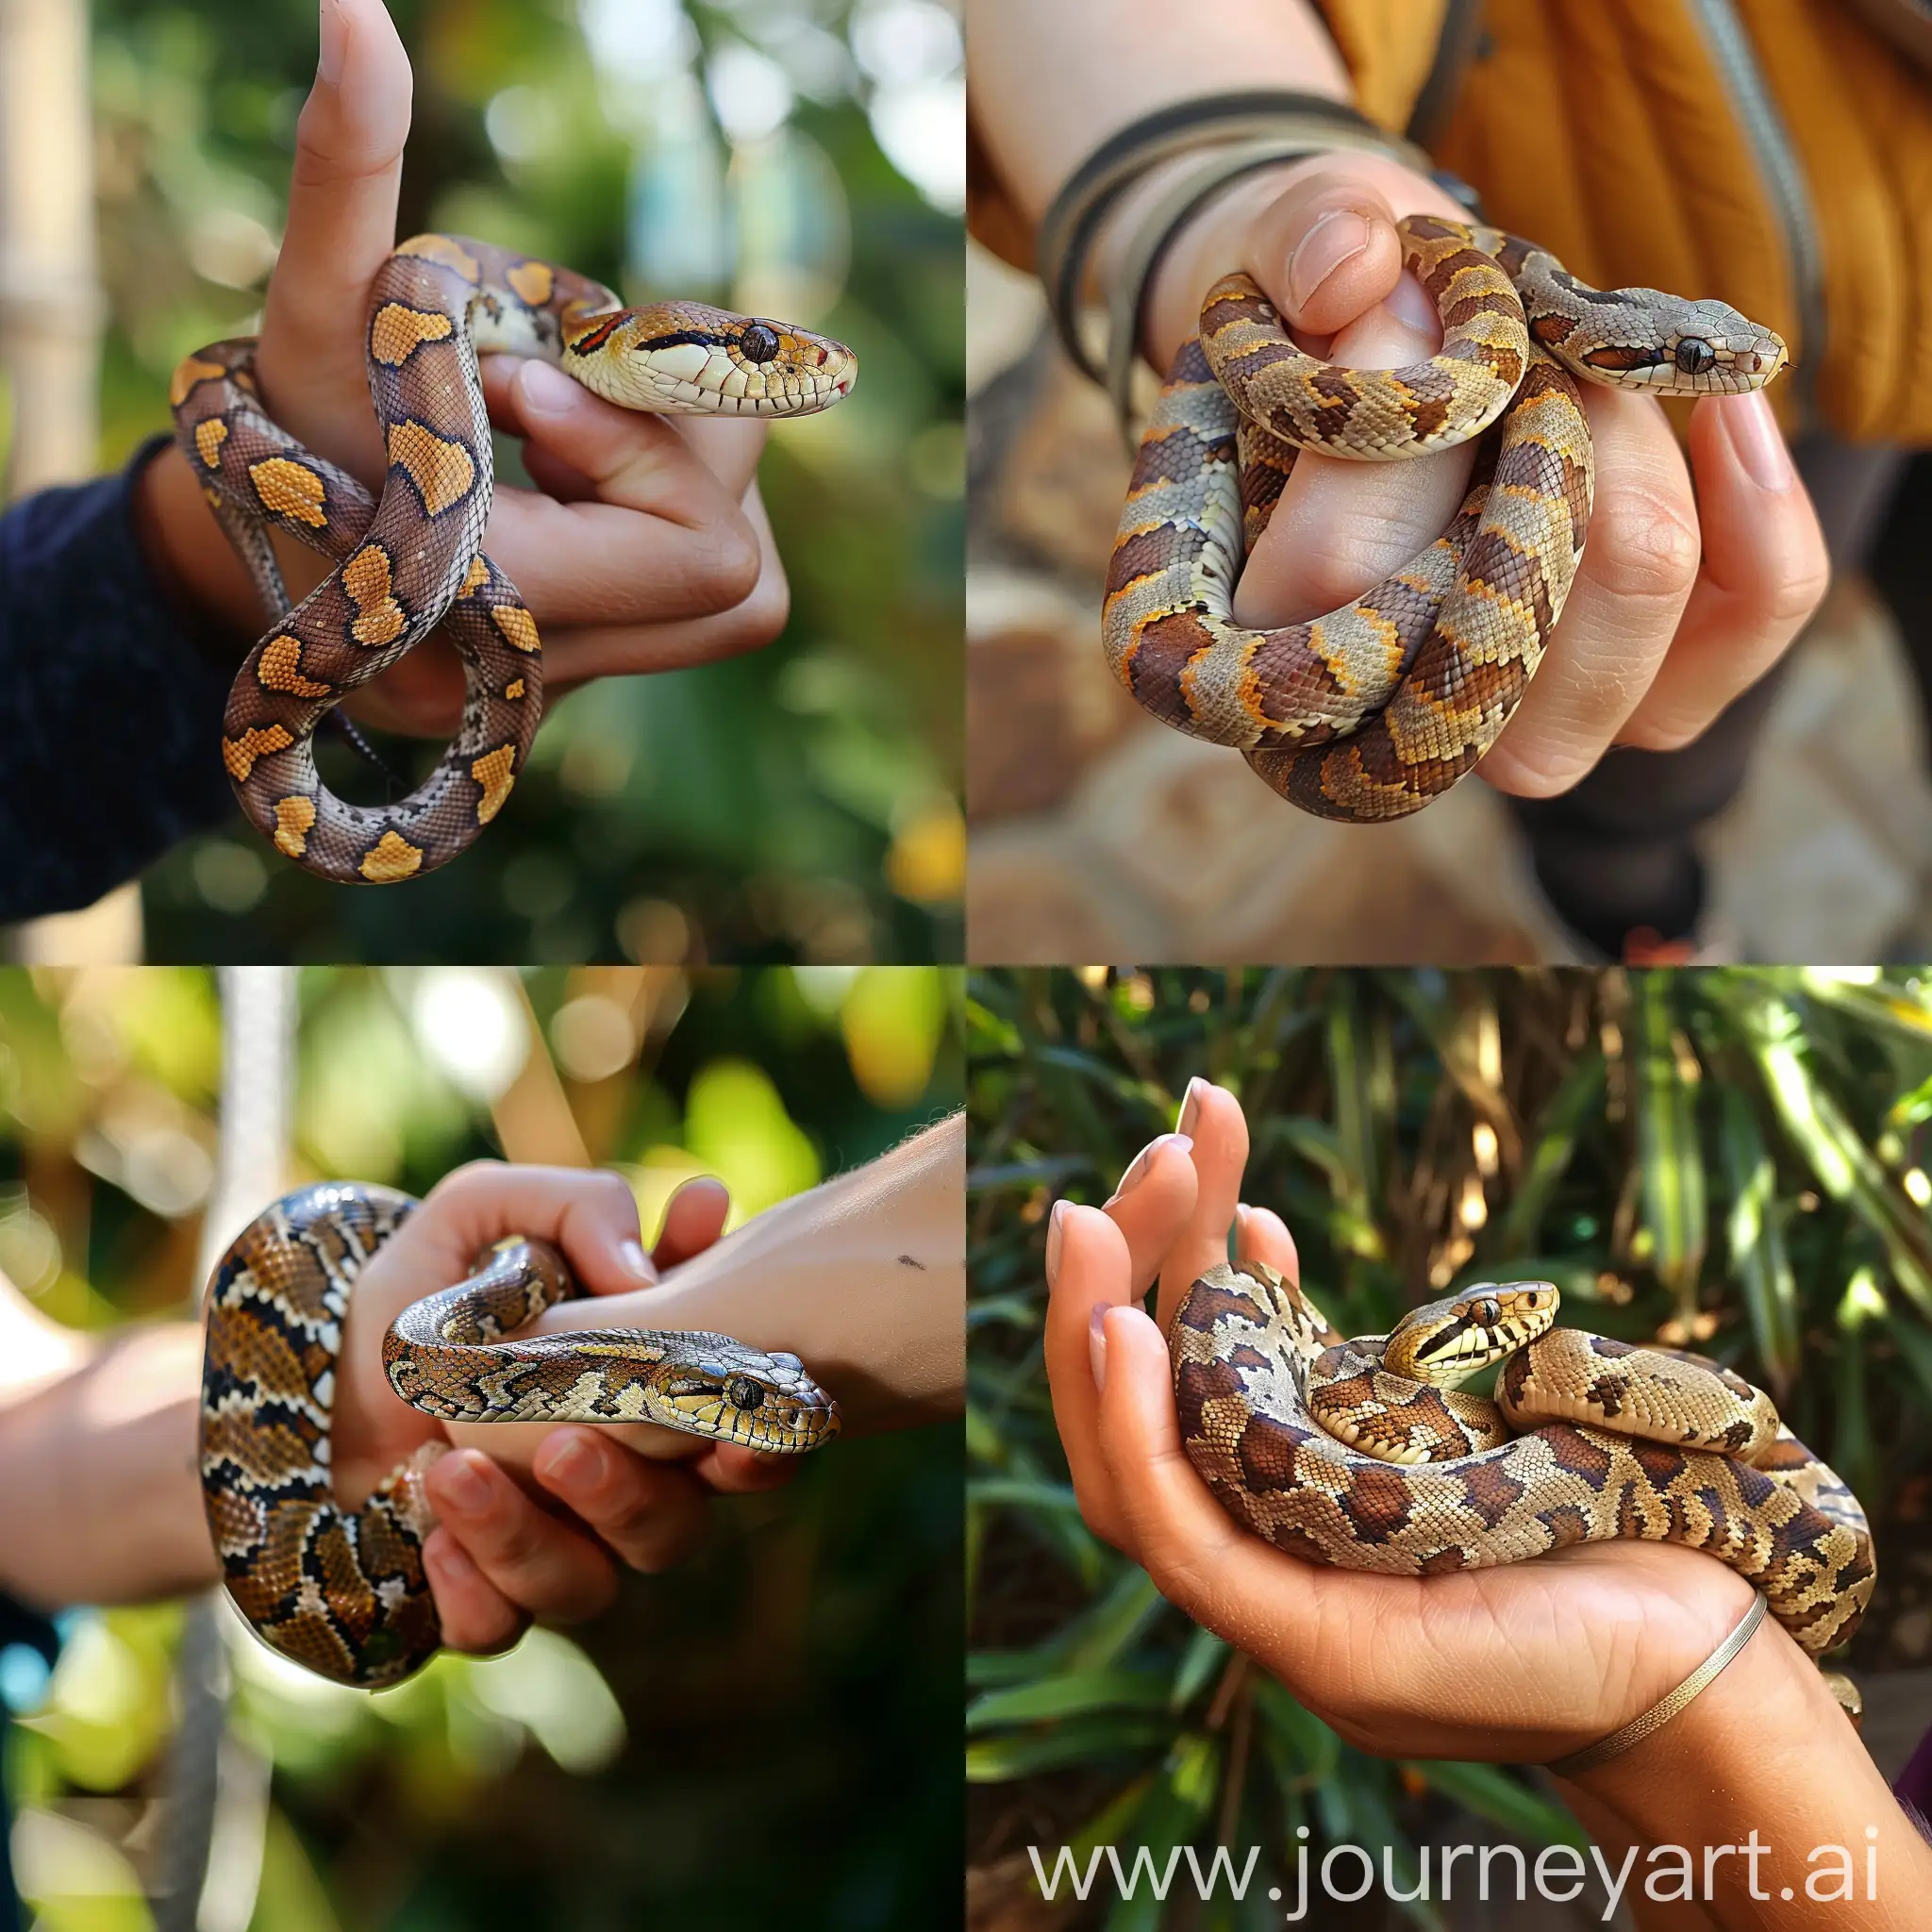 Adorable-Child-Holding-a-Serpent